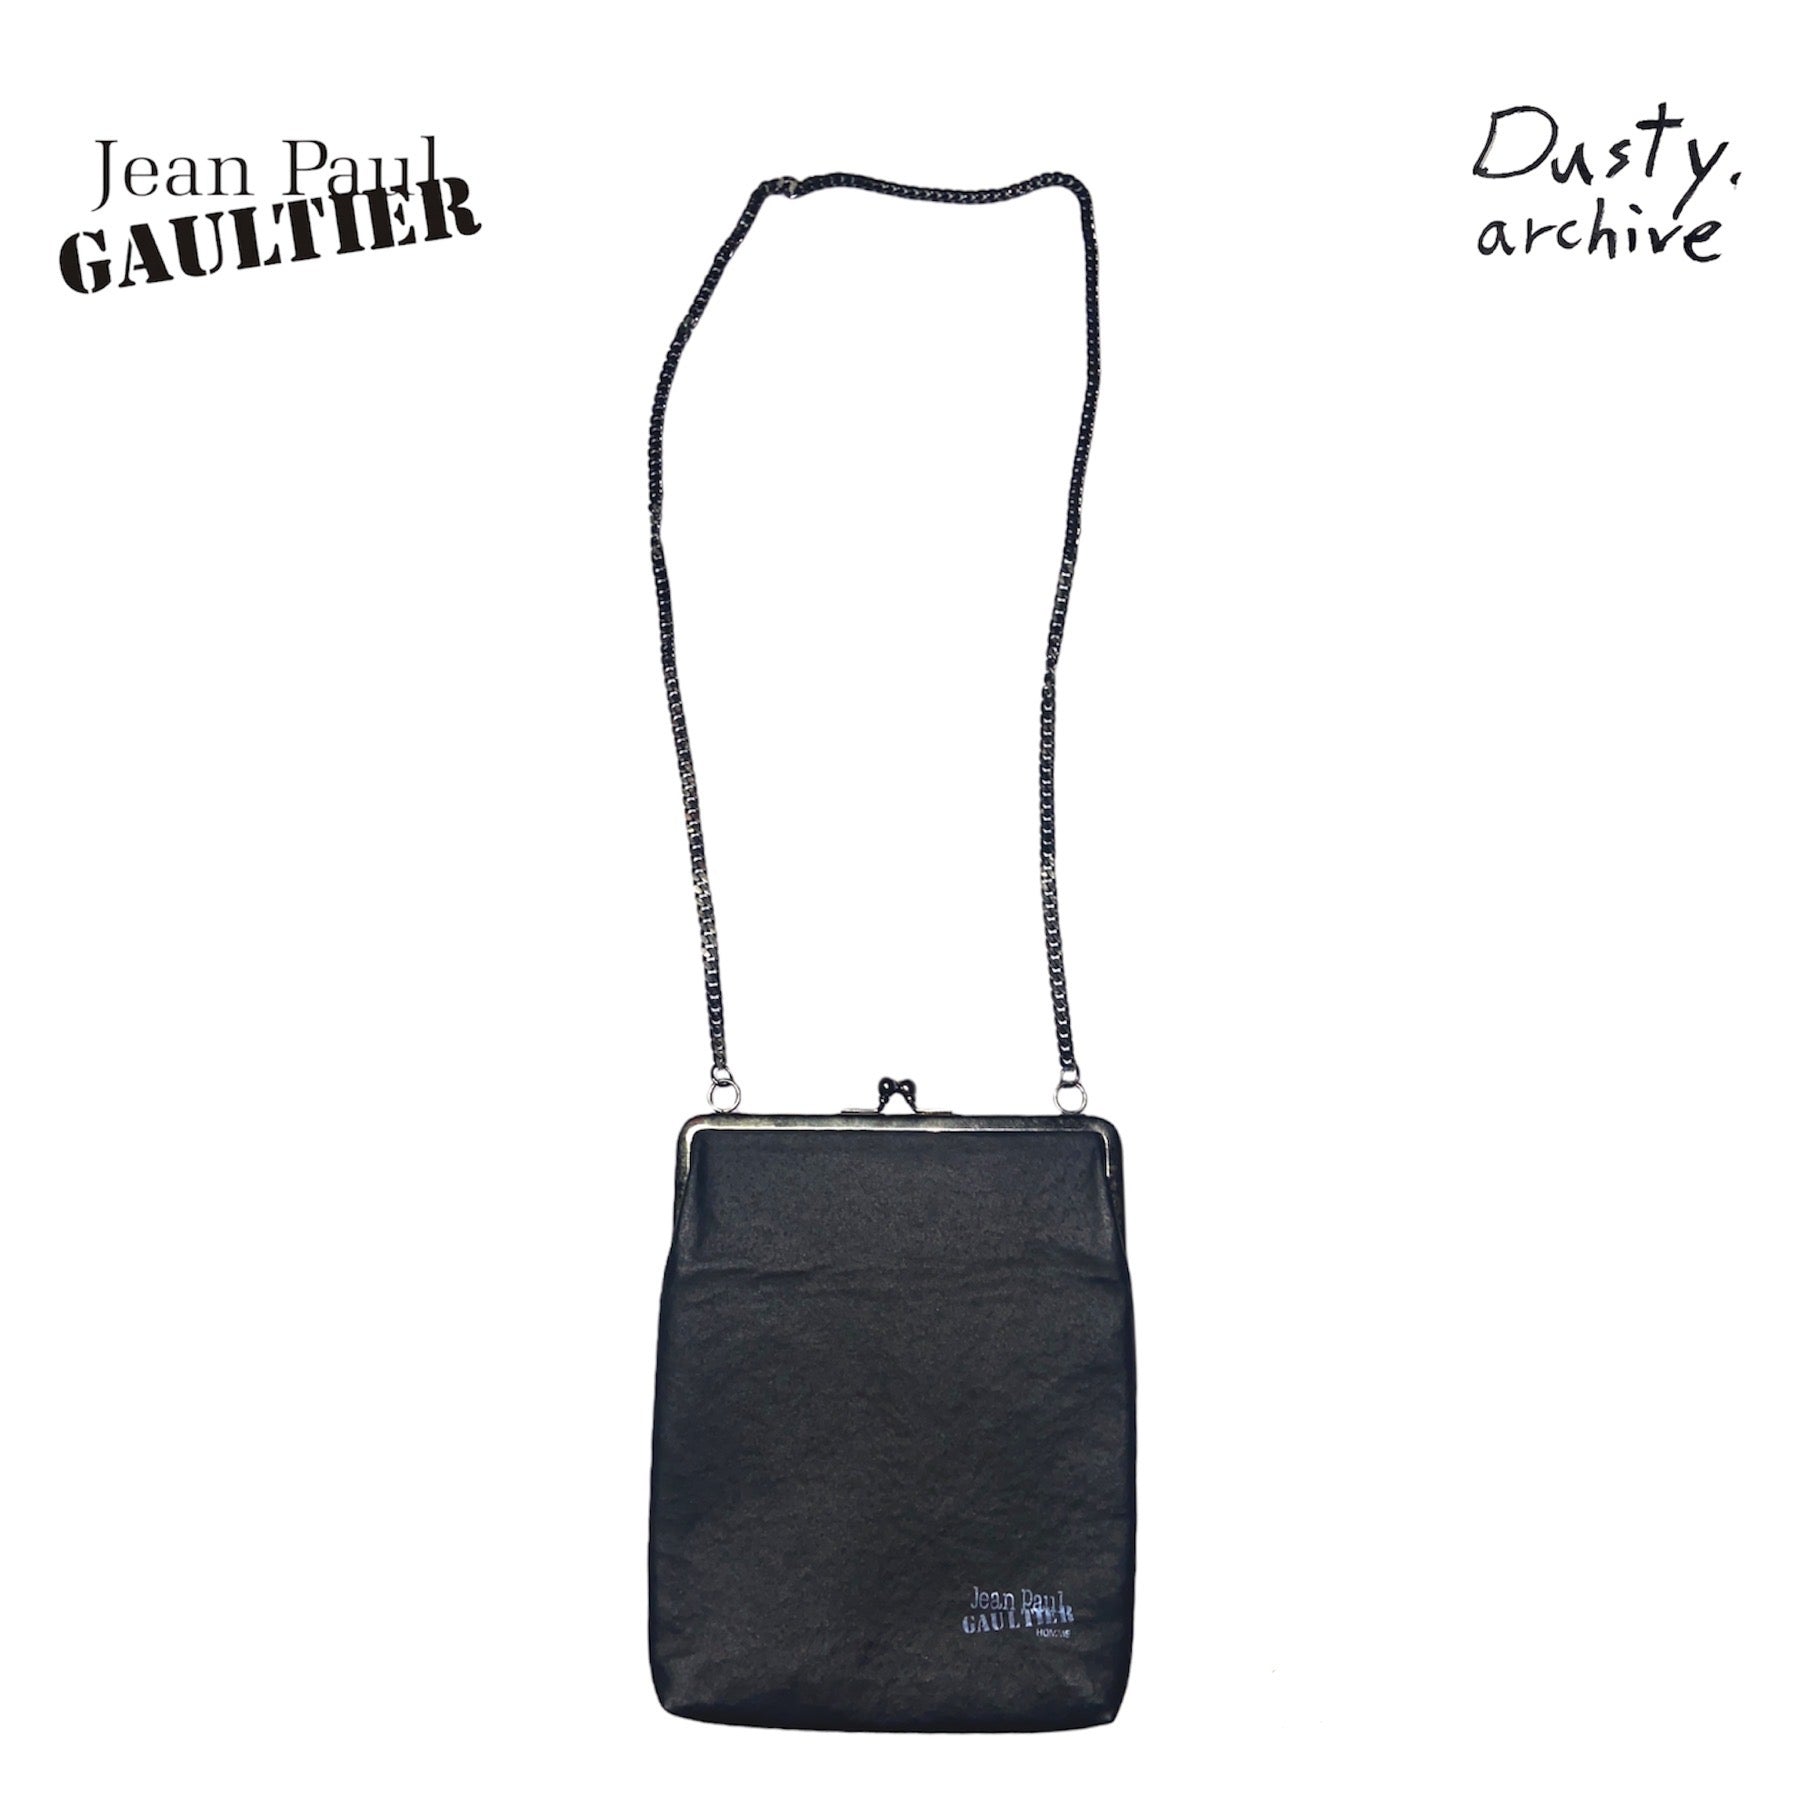 Jean Paul Gaultier Homme leather chain bag – Dusty Archive